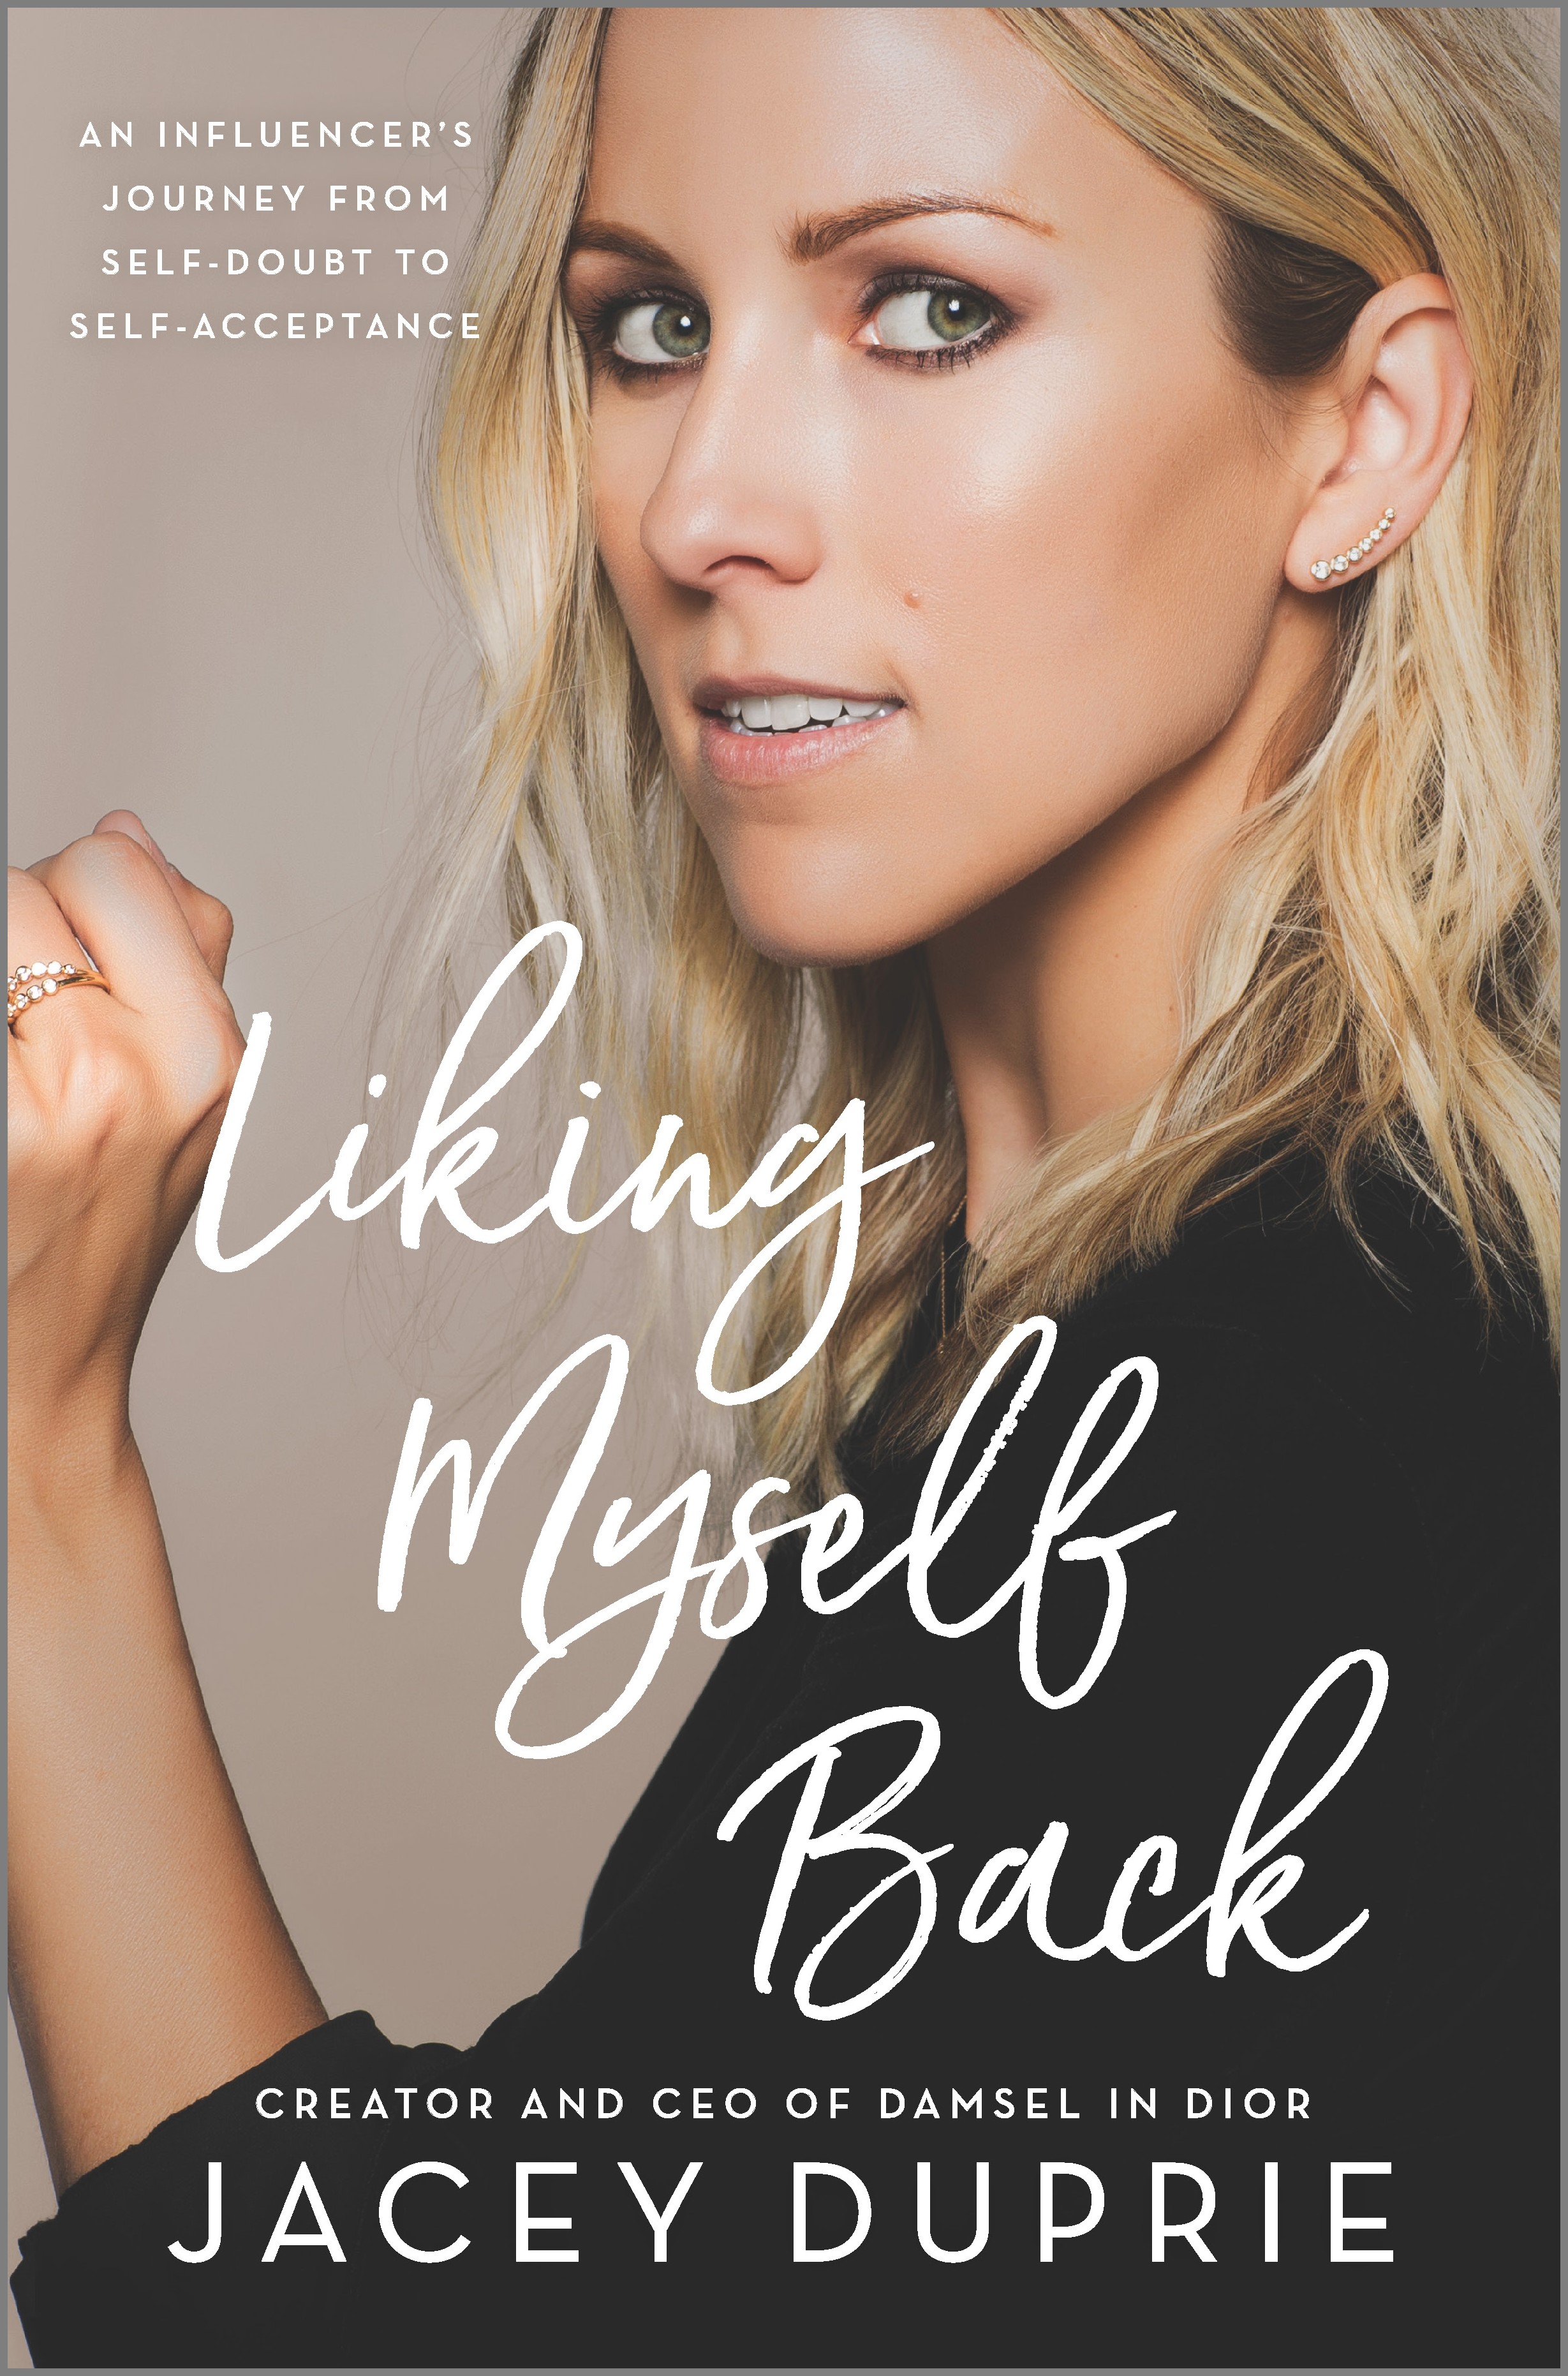 Liking Myself Back : An Influencer's Journey from Self-Doubt to Self-Acceptance | Biography & Memoir